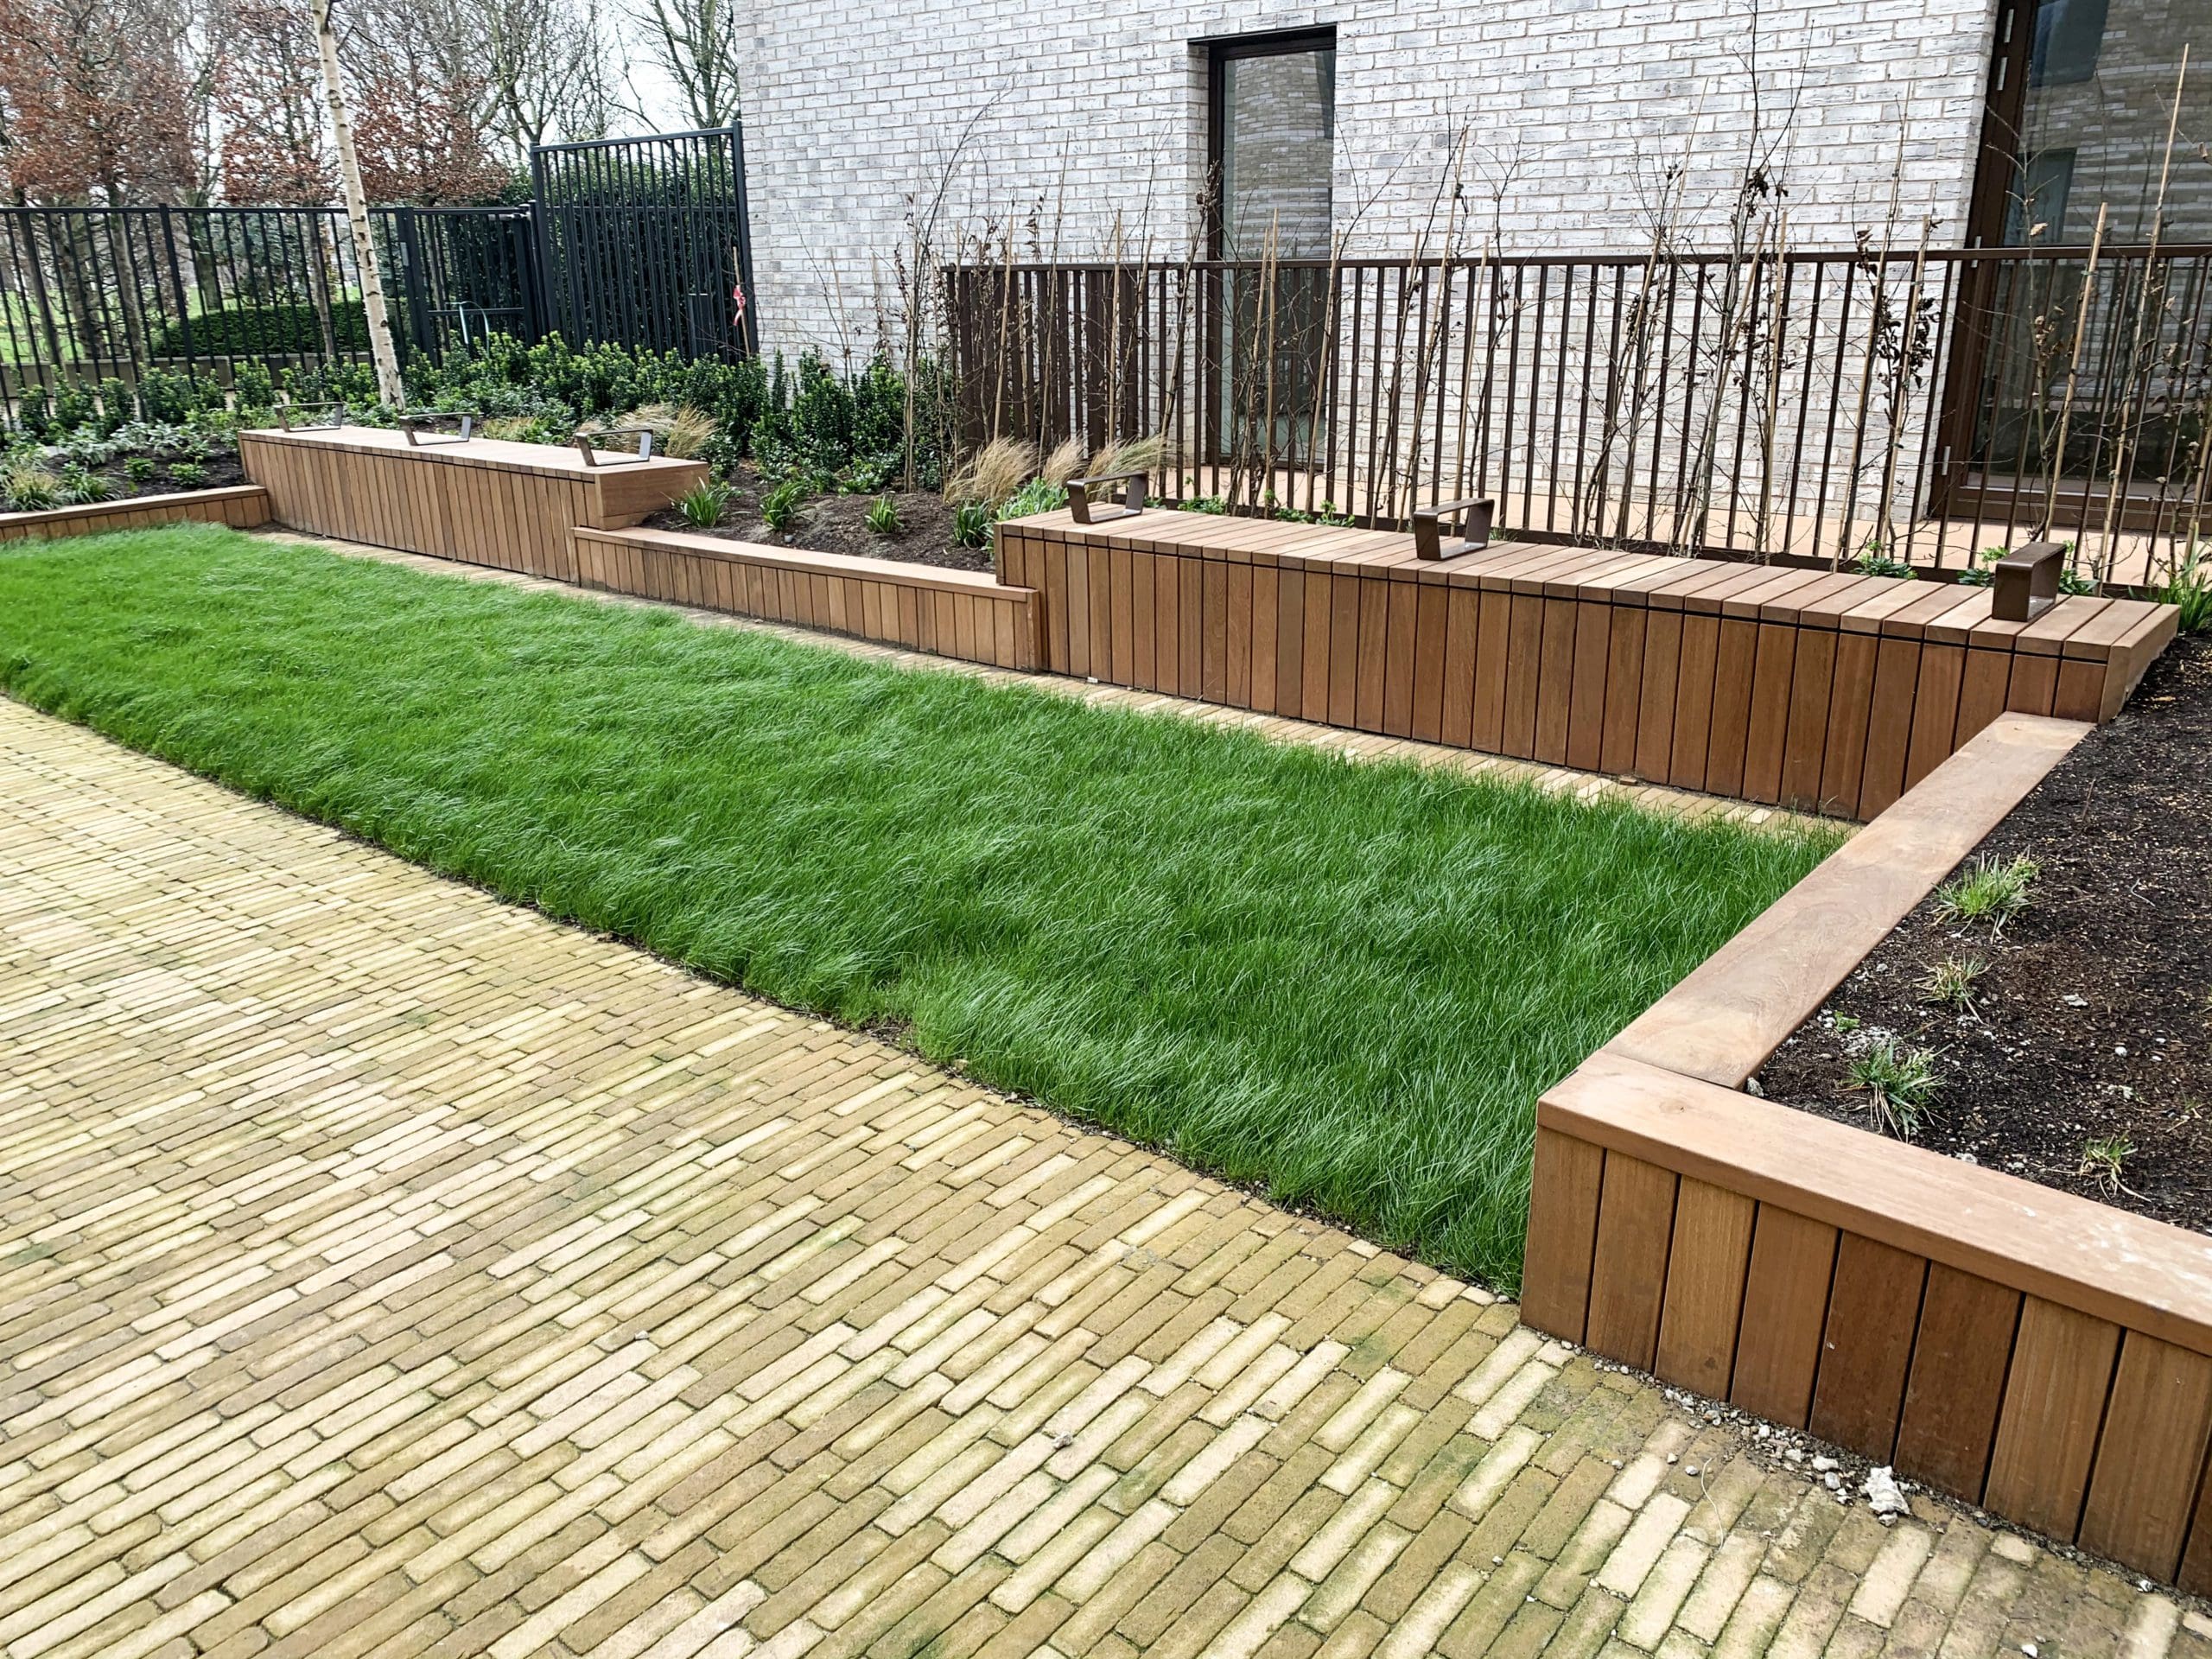 Angled line of wooden timber seating bench with arm rest separators in between raised bed planters